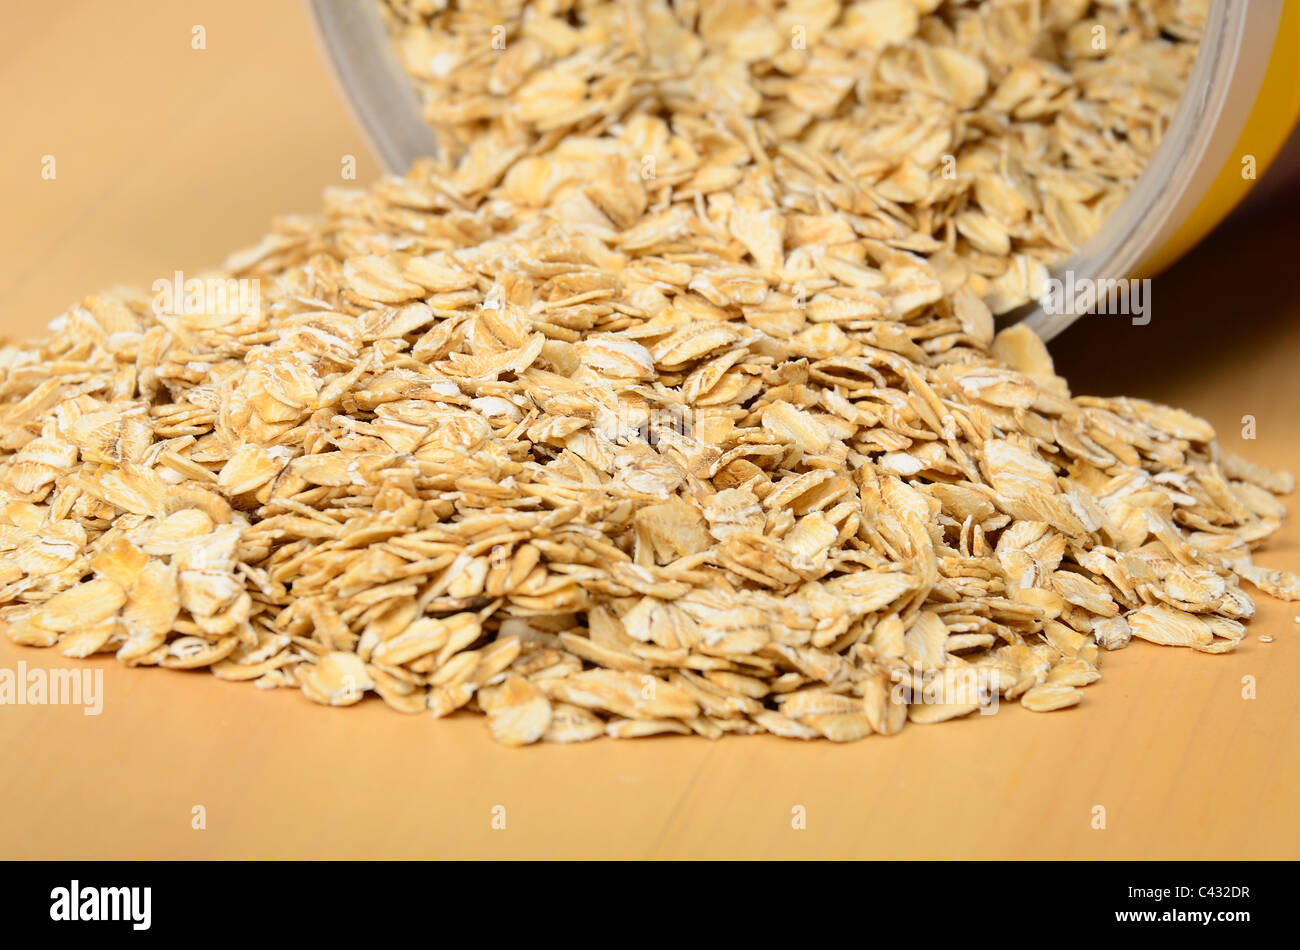 Oatmeal spilling out of bin. Selective focus on middle of pile. Stock Photo